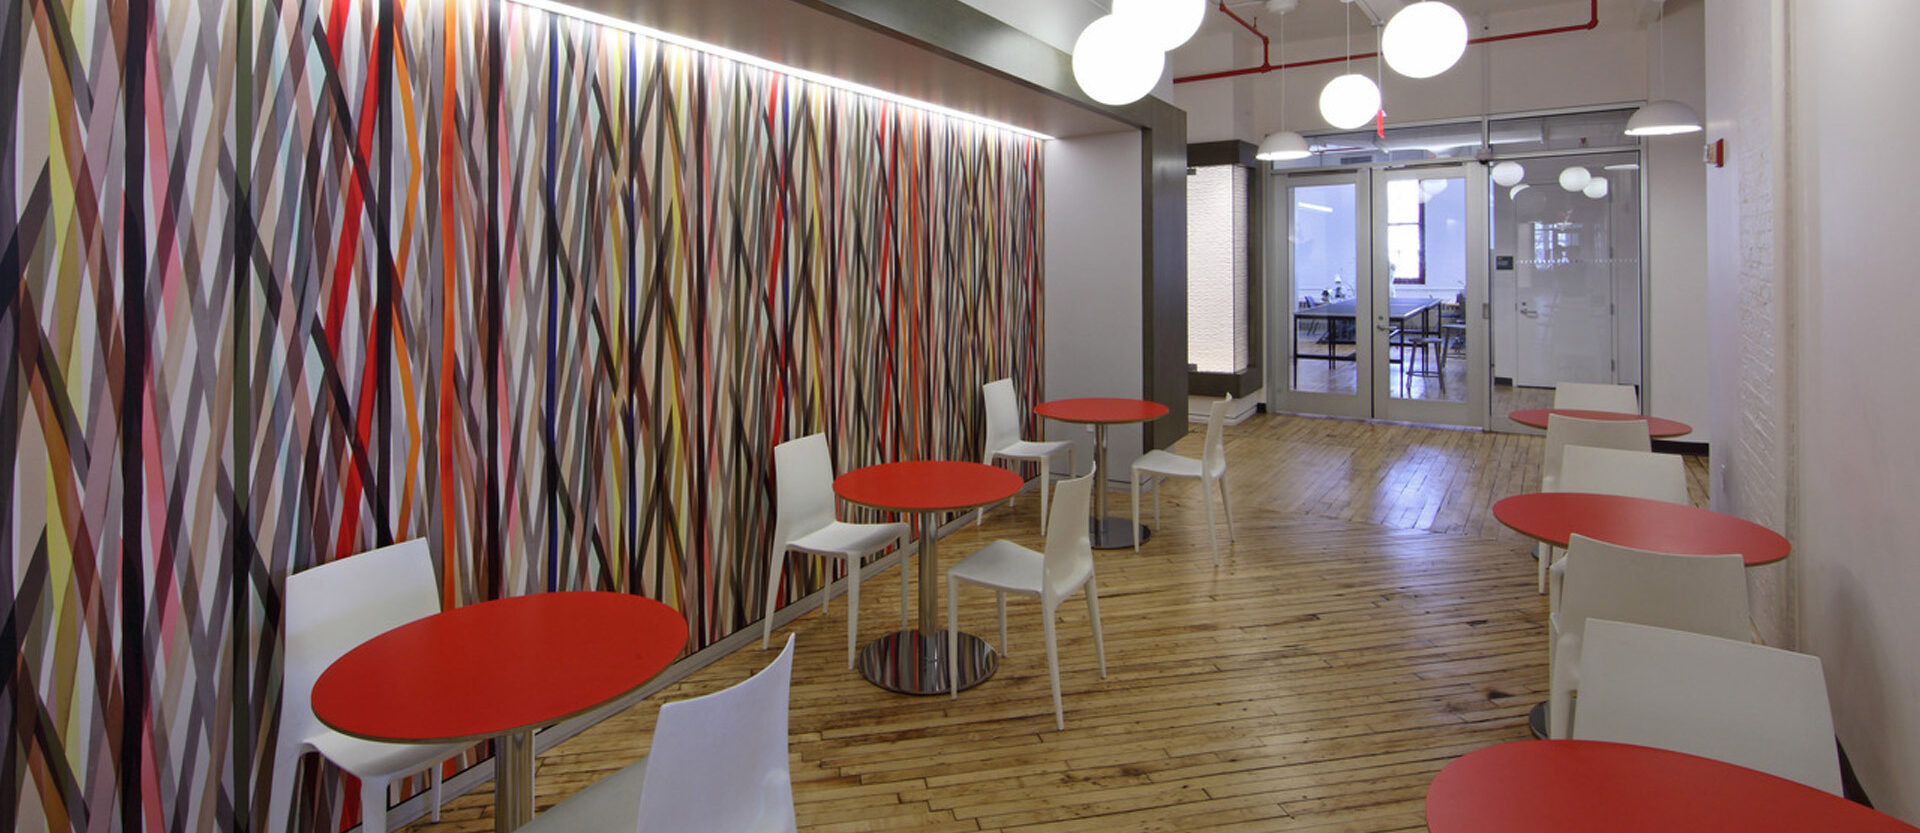 Modern office break room featuring a vibrant, geometric patterned accent wall, white contemporary chairs with red cushions, round white pendant lights, and natural wood flooring adding warmth to the minimalist design. The space is bright, inviting, and encourages informal collaboration.